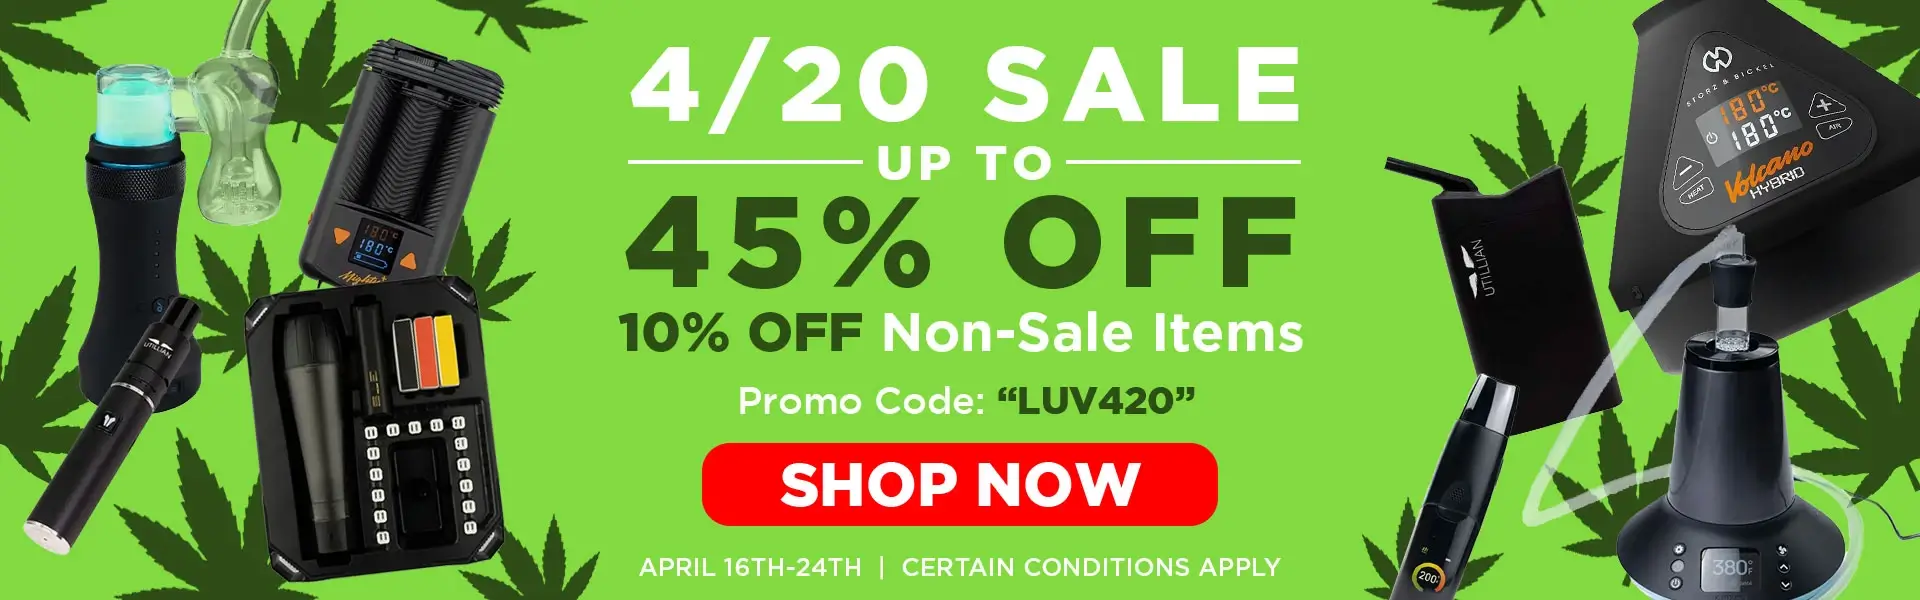 420 Sale Up to 45% off